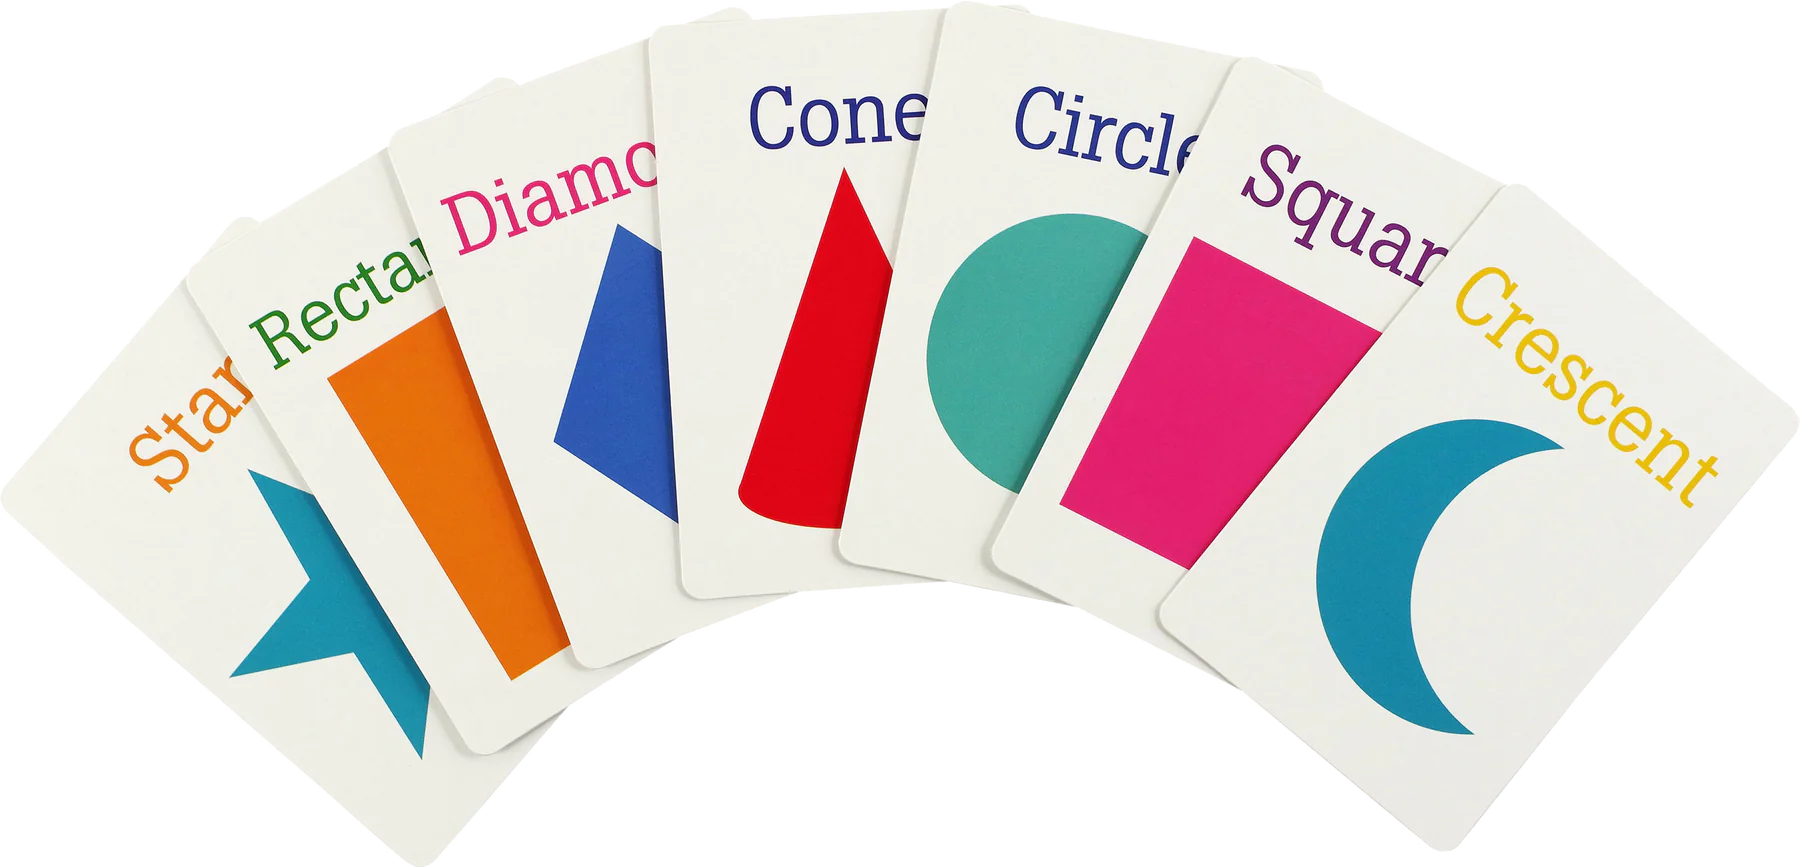 Colors and Shapes Flash Cards 